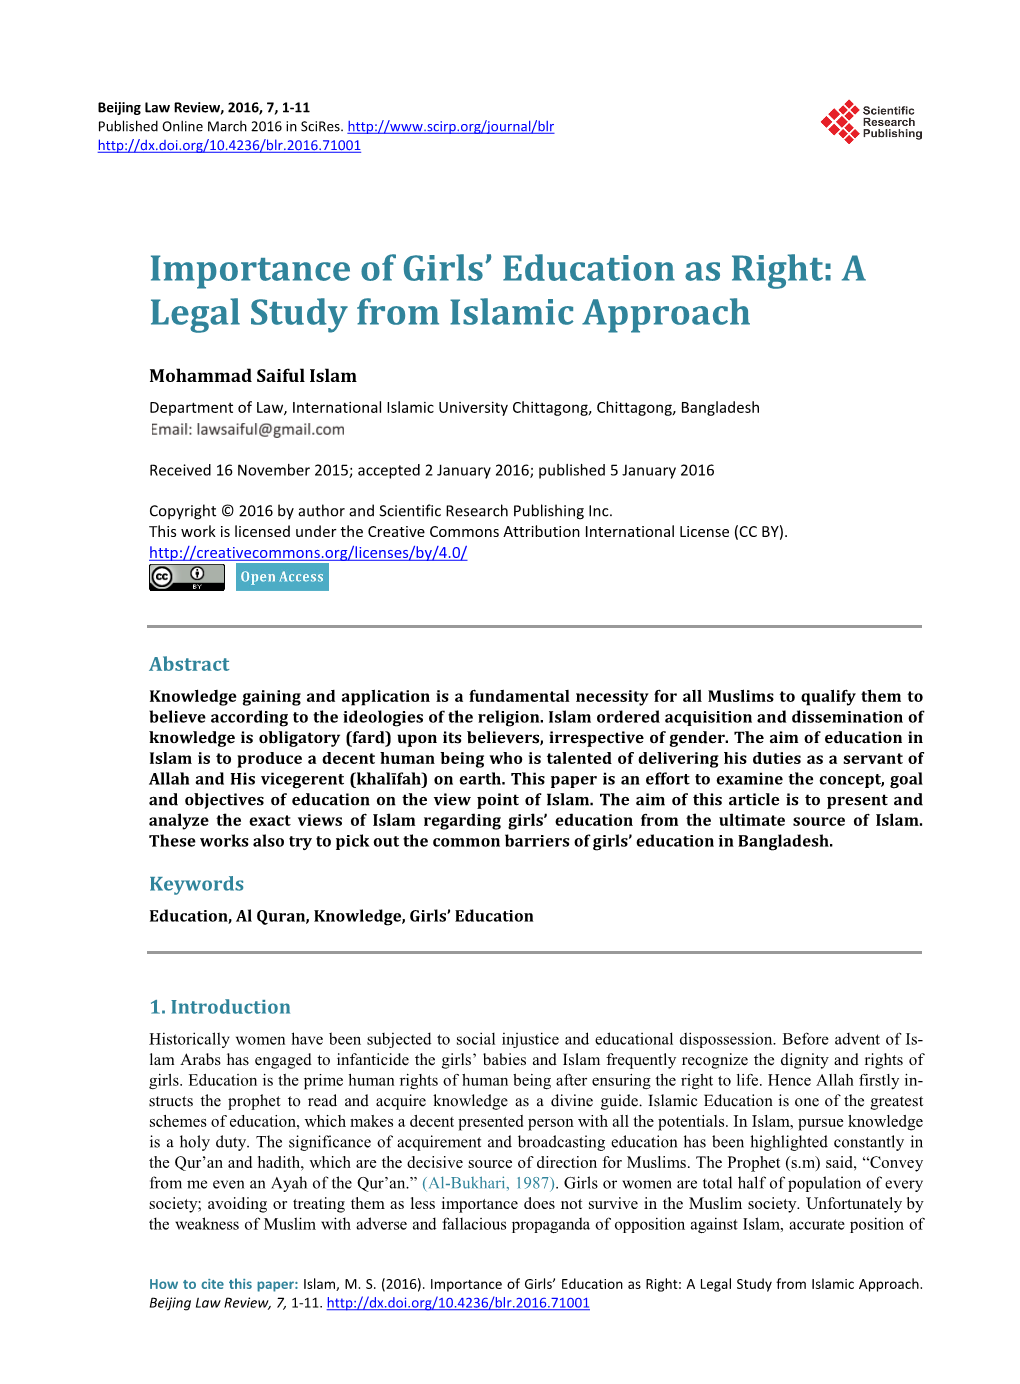 Importance of Girls' Education As Right: a Legal Study from Islamic